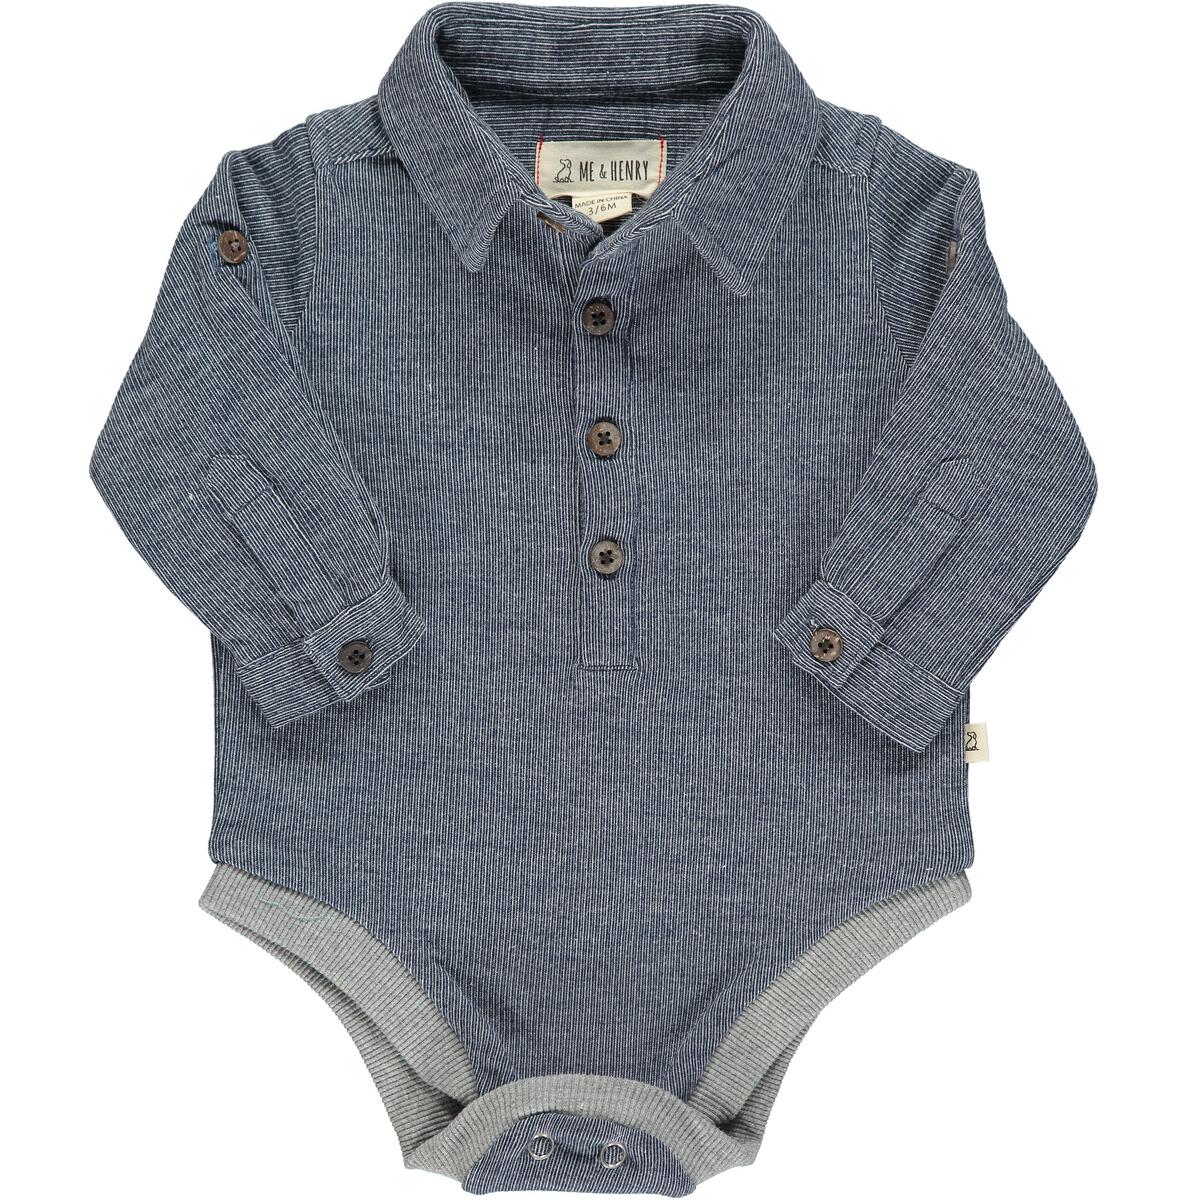 Me and Henry  RIPLEY Jersey Onesie - Blue